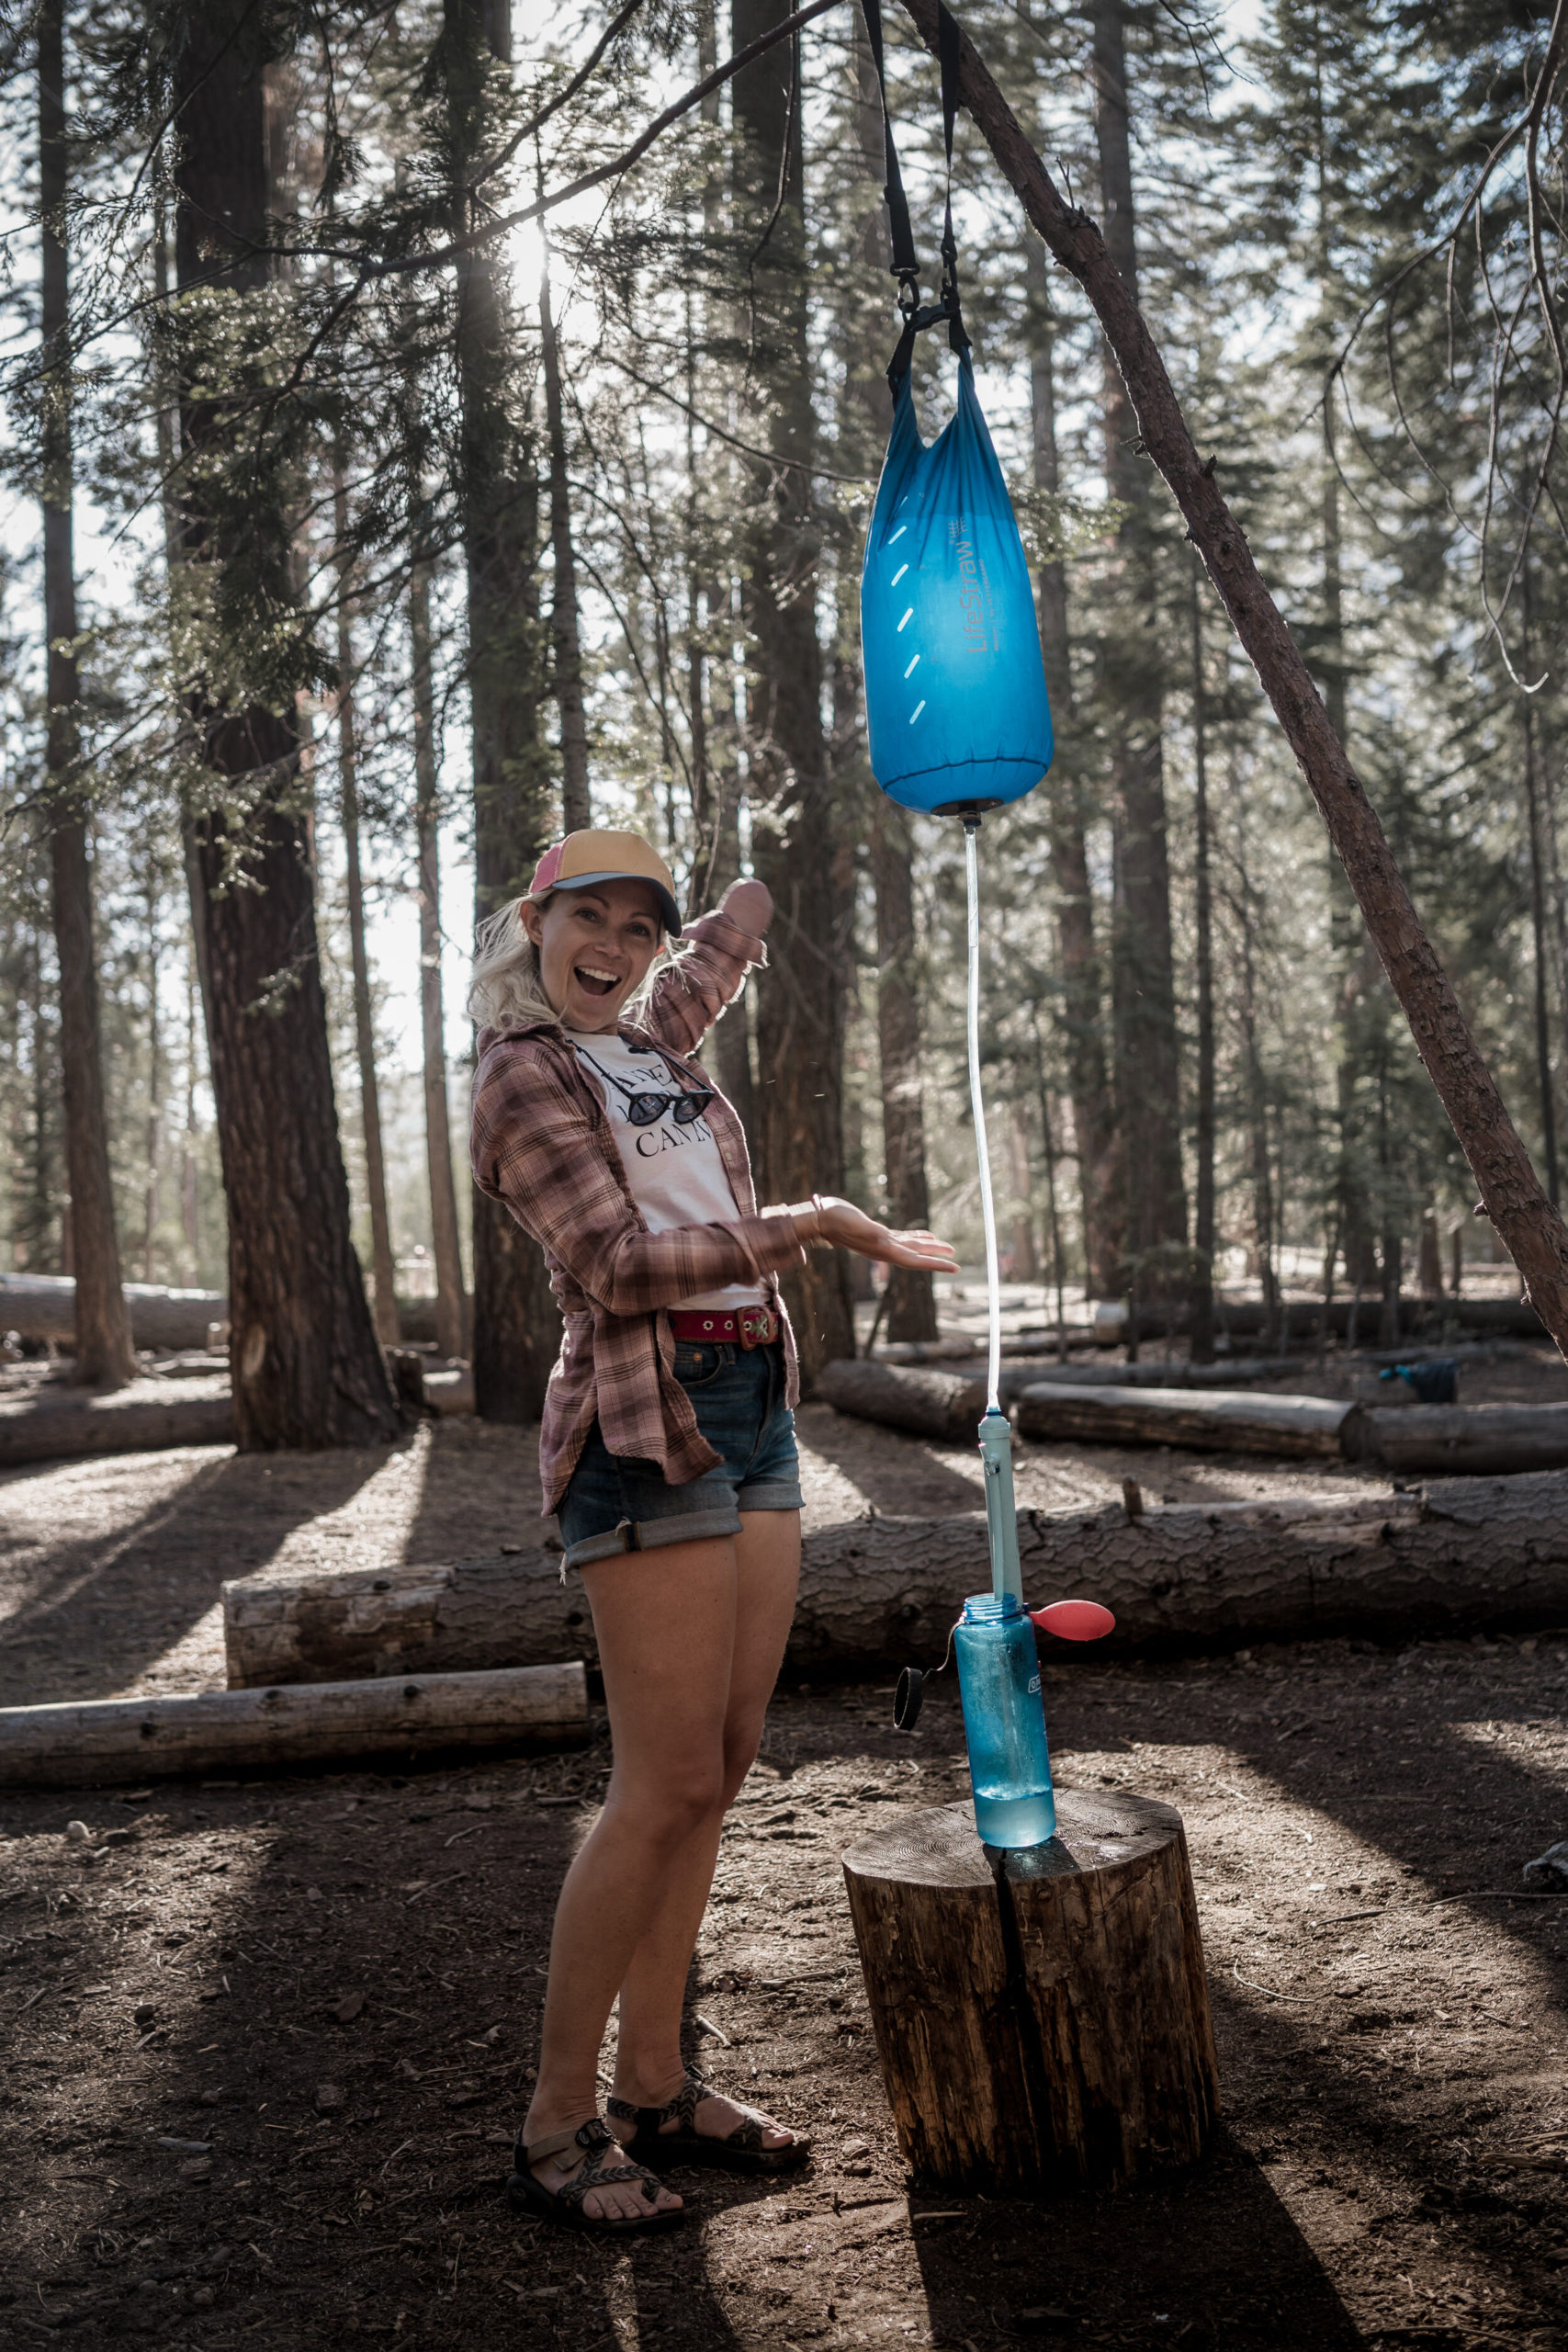 Backpacking Yosemite National Park at Half Dome’s LITTLE YOSEMITE VALLEY CAMPGROUND. Filtering water with Lifestraw gravity water filter